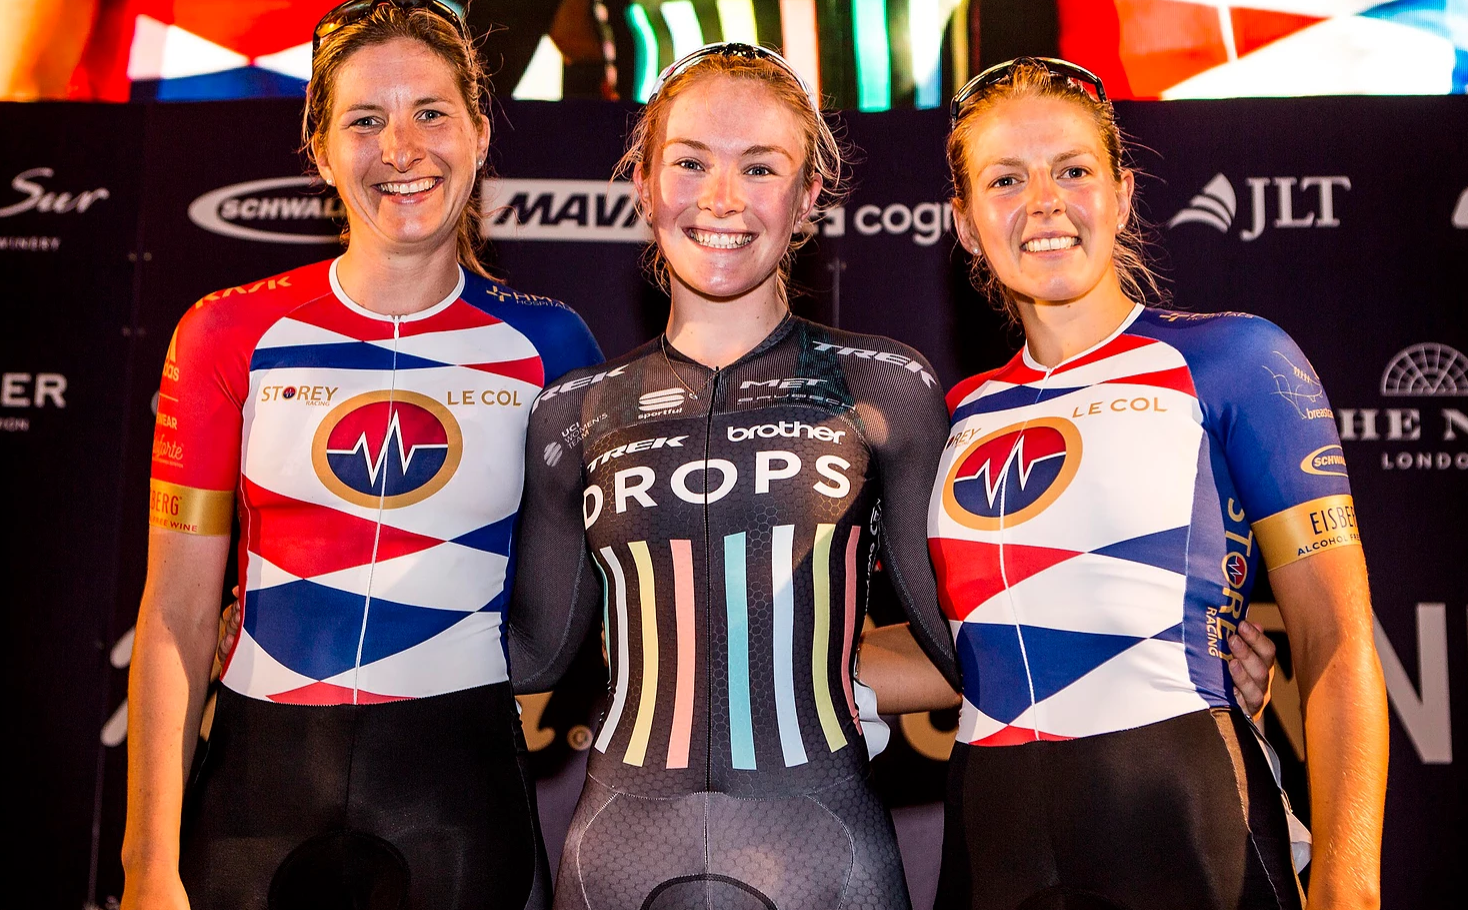 STOREY RACING AT RAPHA NOCTURNE AND TIME TRIAL SUCCESS